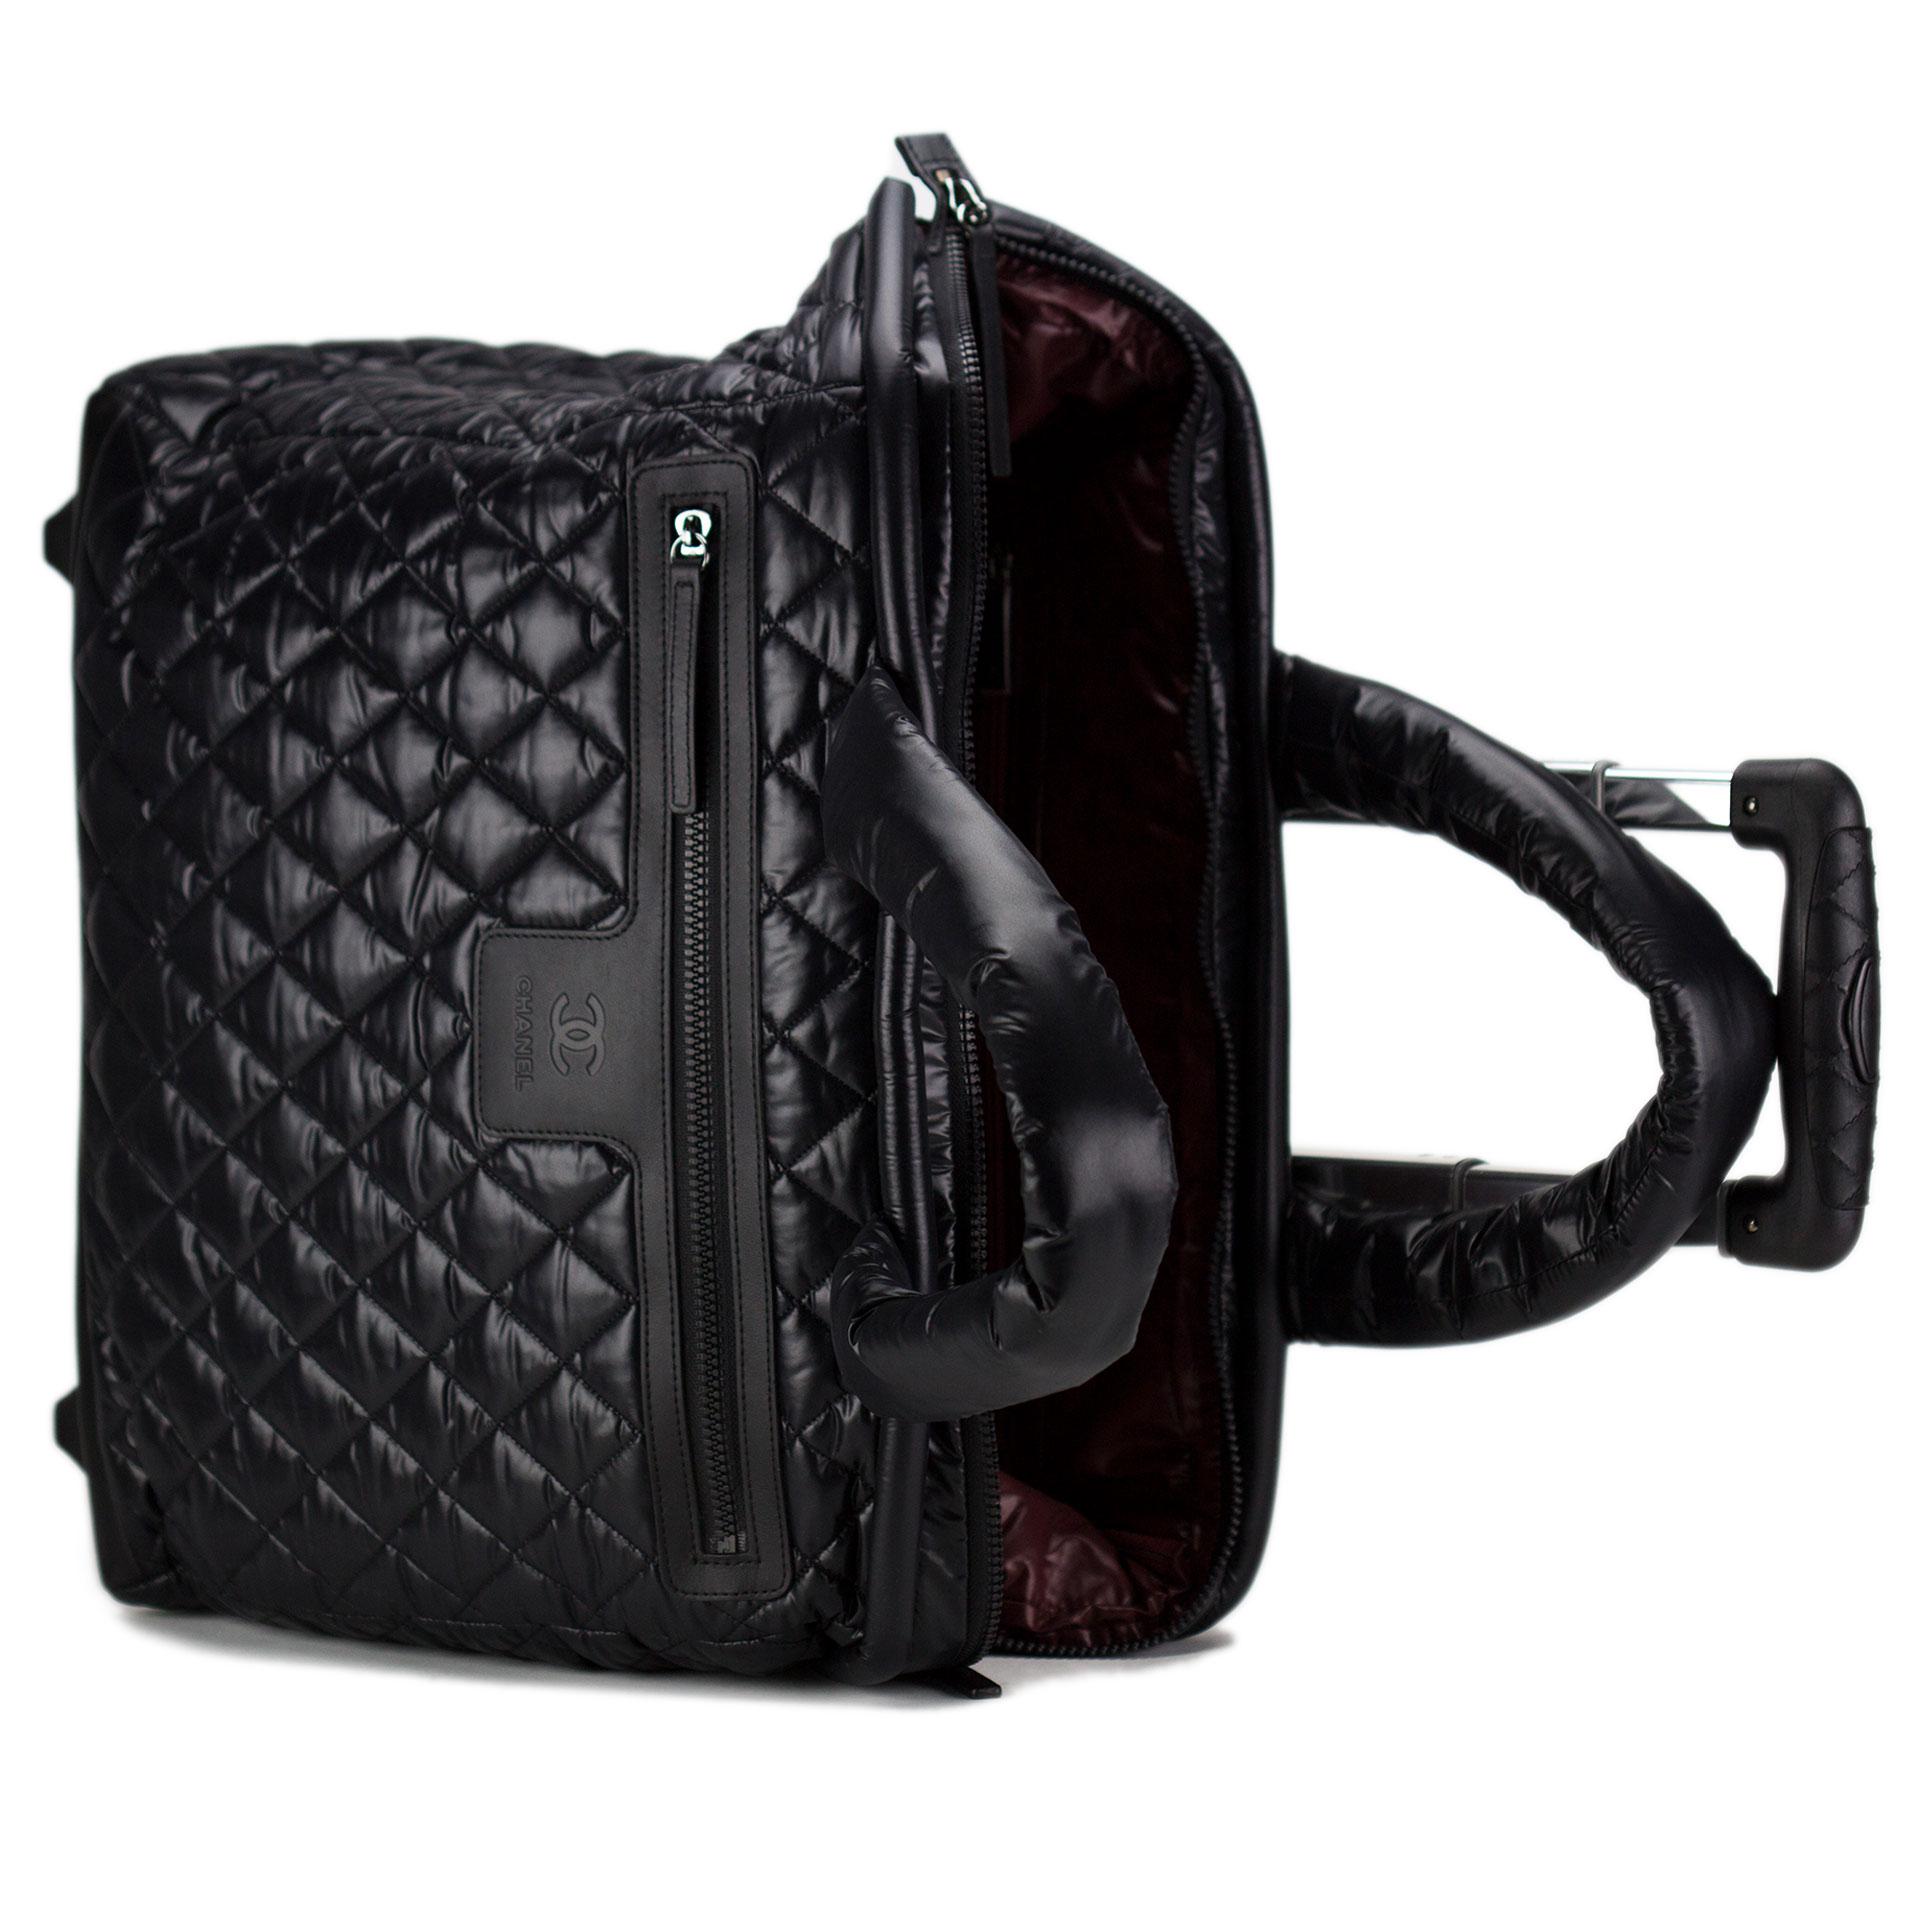 Chanel 2012 Coco Cocoon Quilted Case Carry On Trolley Travel Black Luggage Bag In Good Condition For Sale In Miami, FL